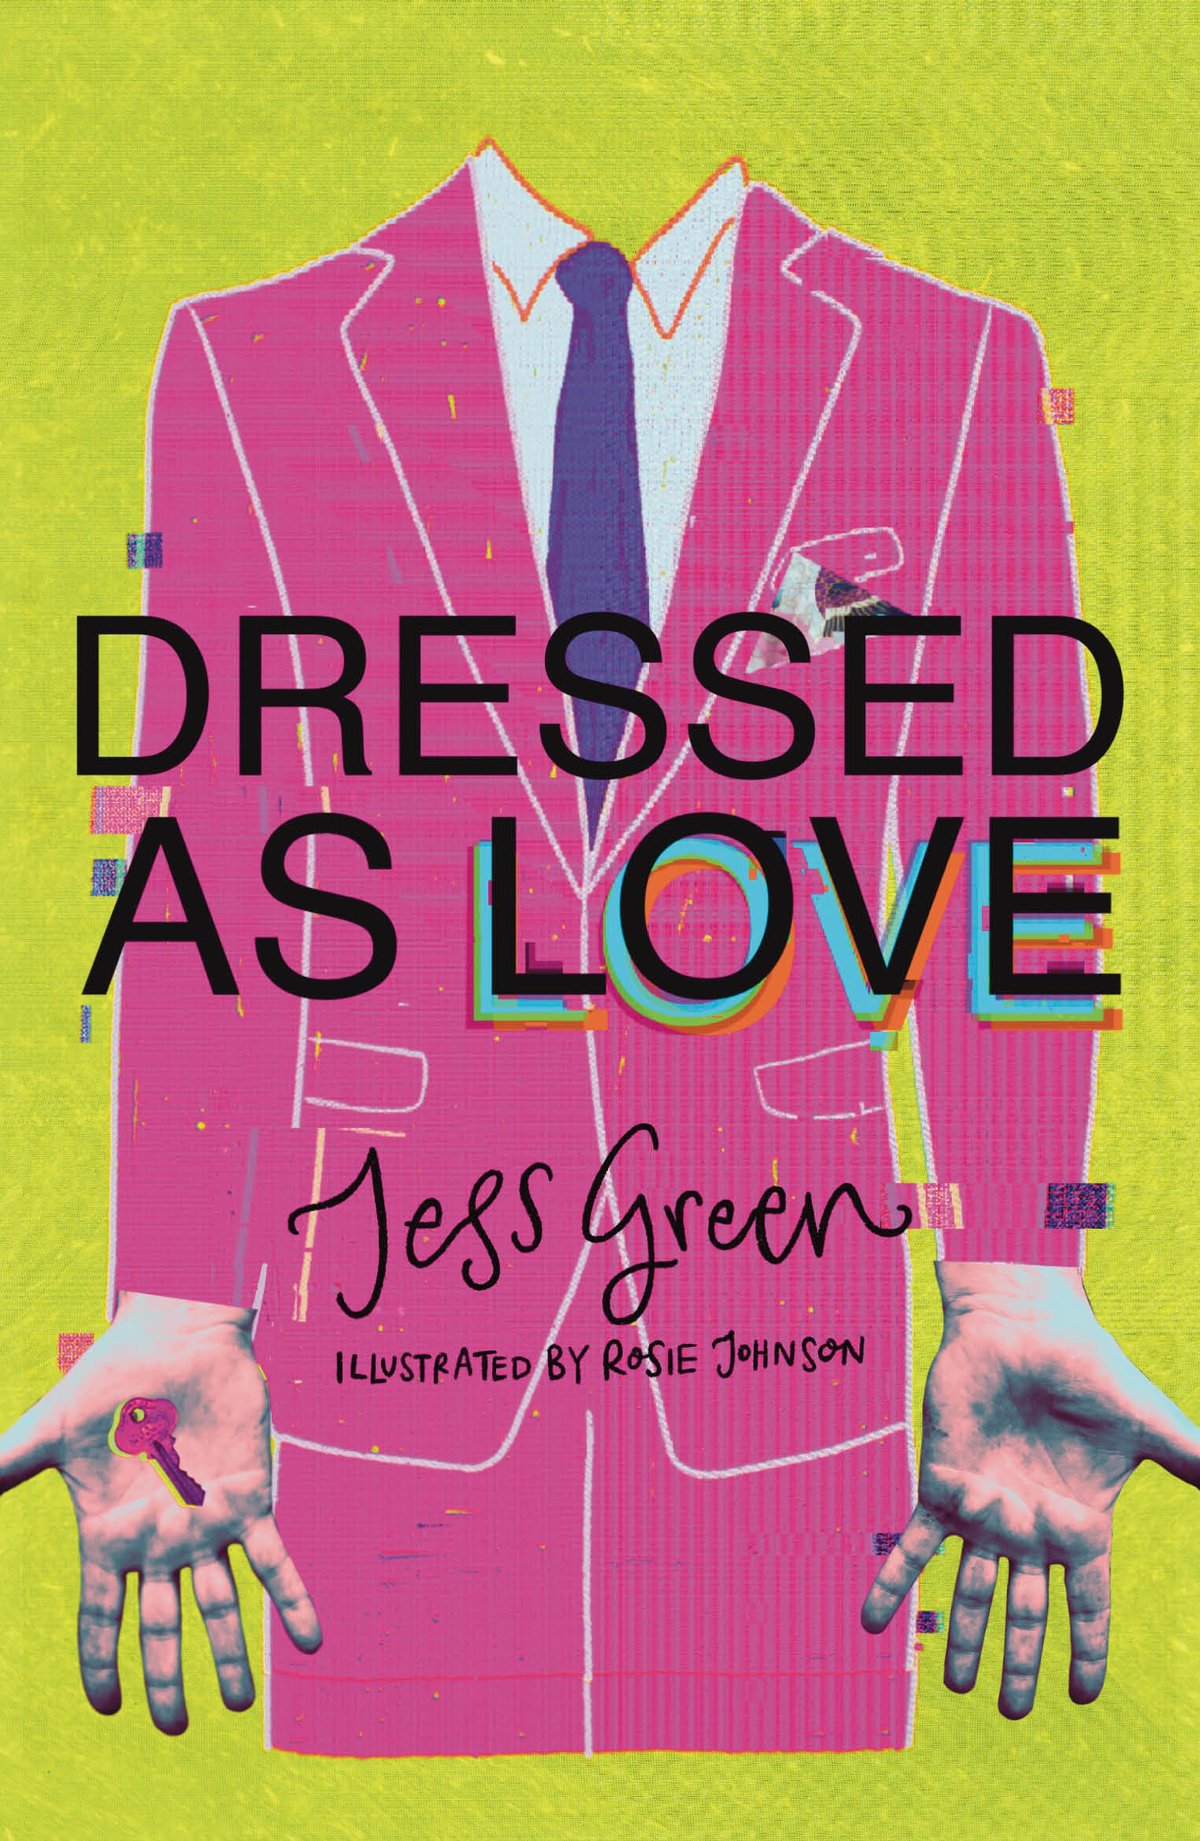 Image of Dressed As Love by Jess Green 